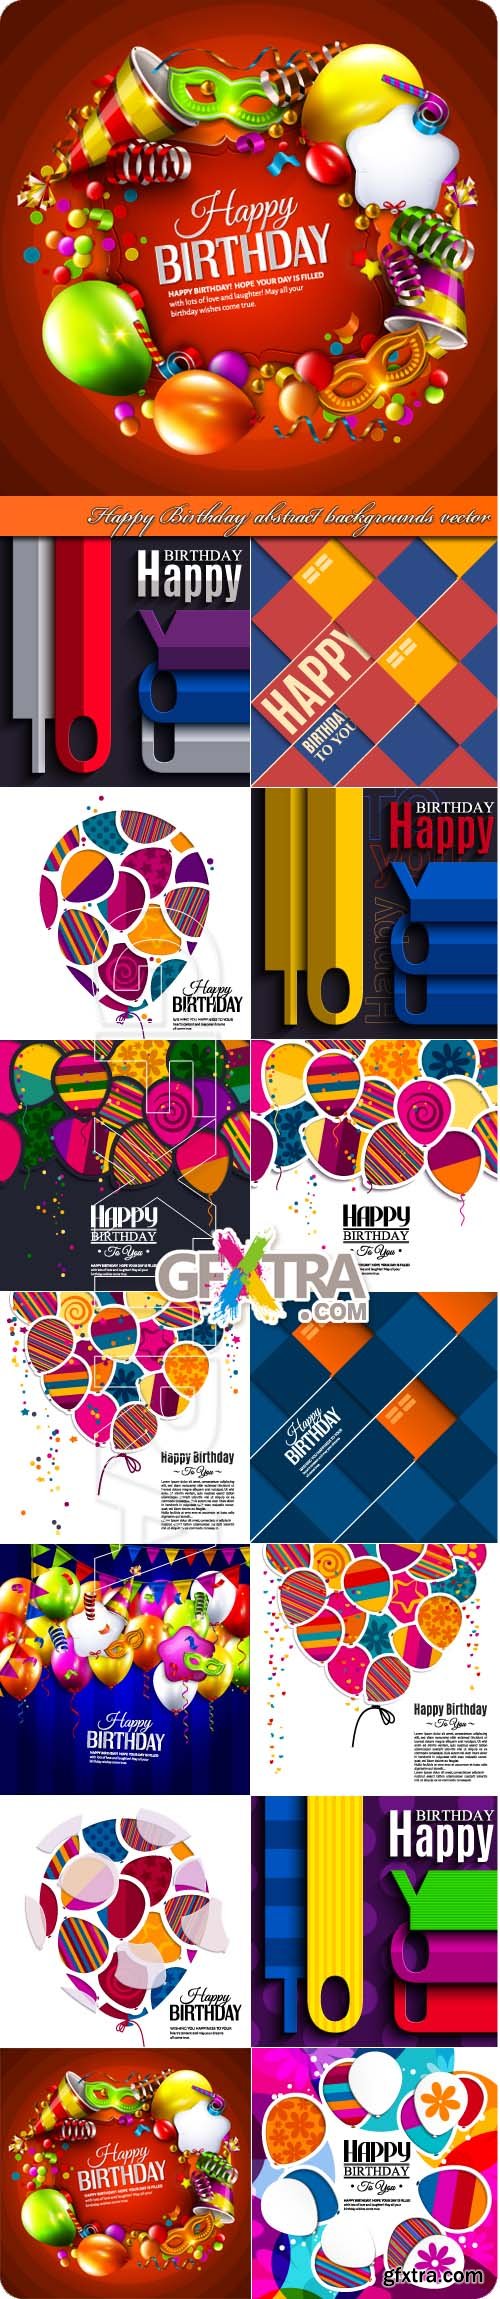 Happy Birthday abstract backgrounds vector